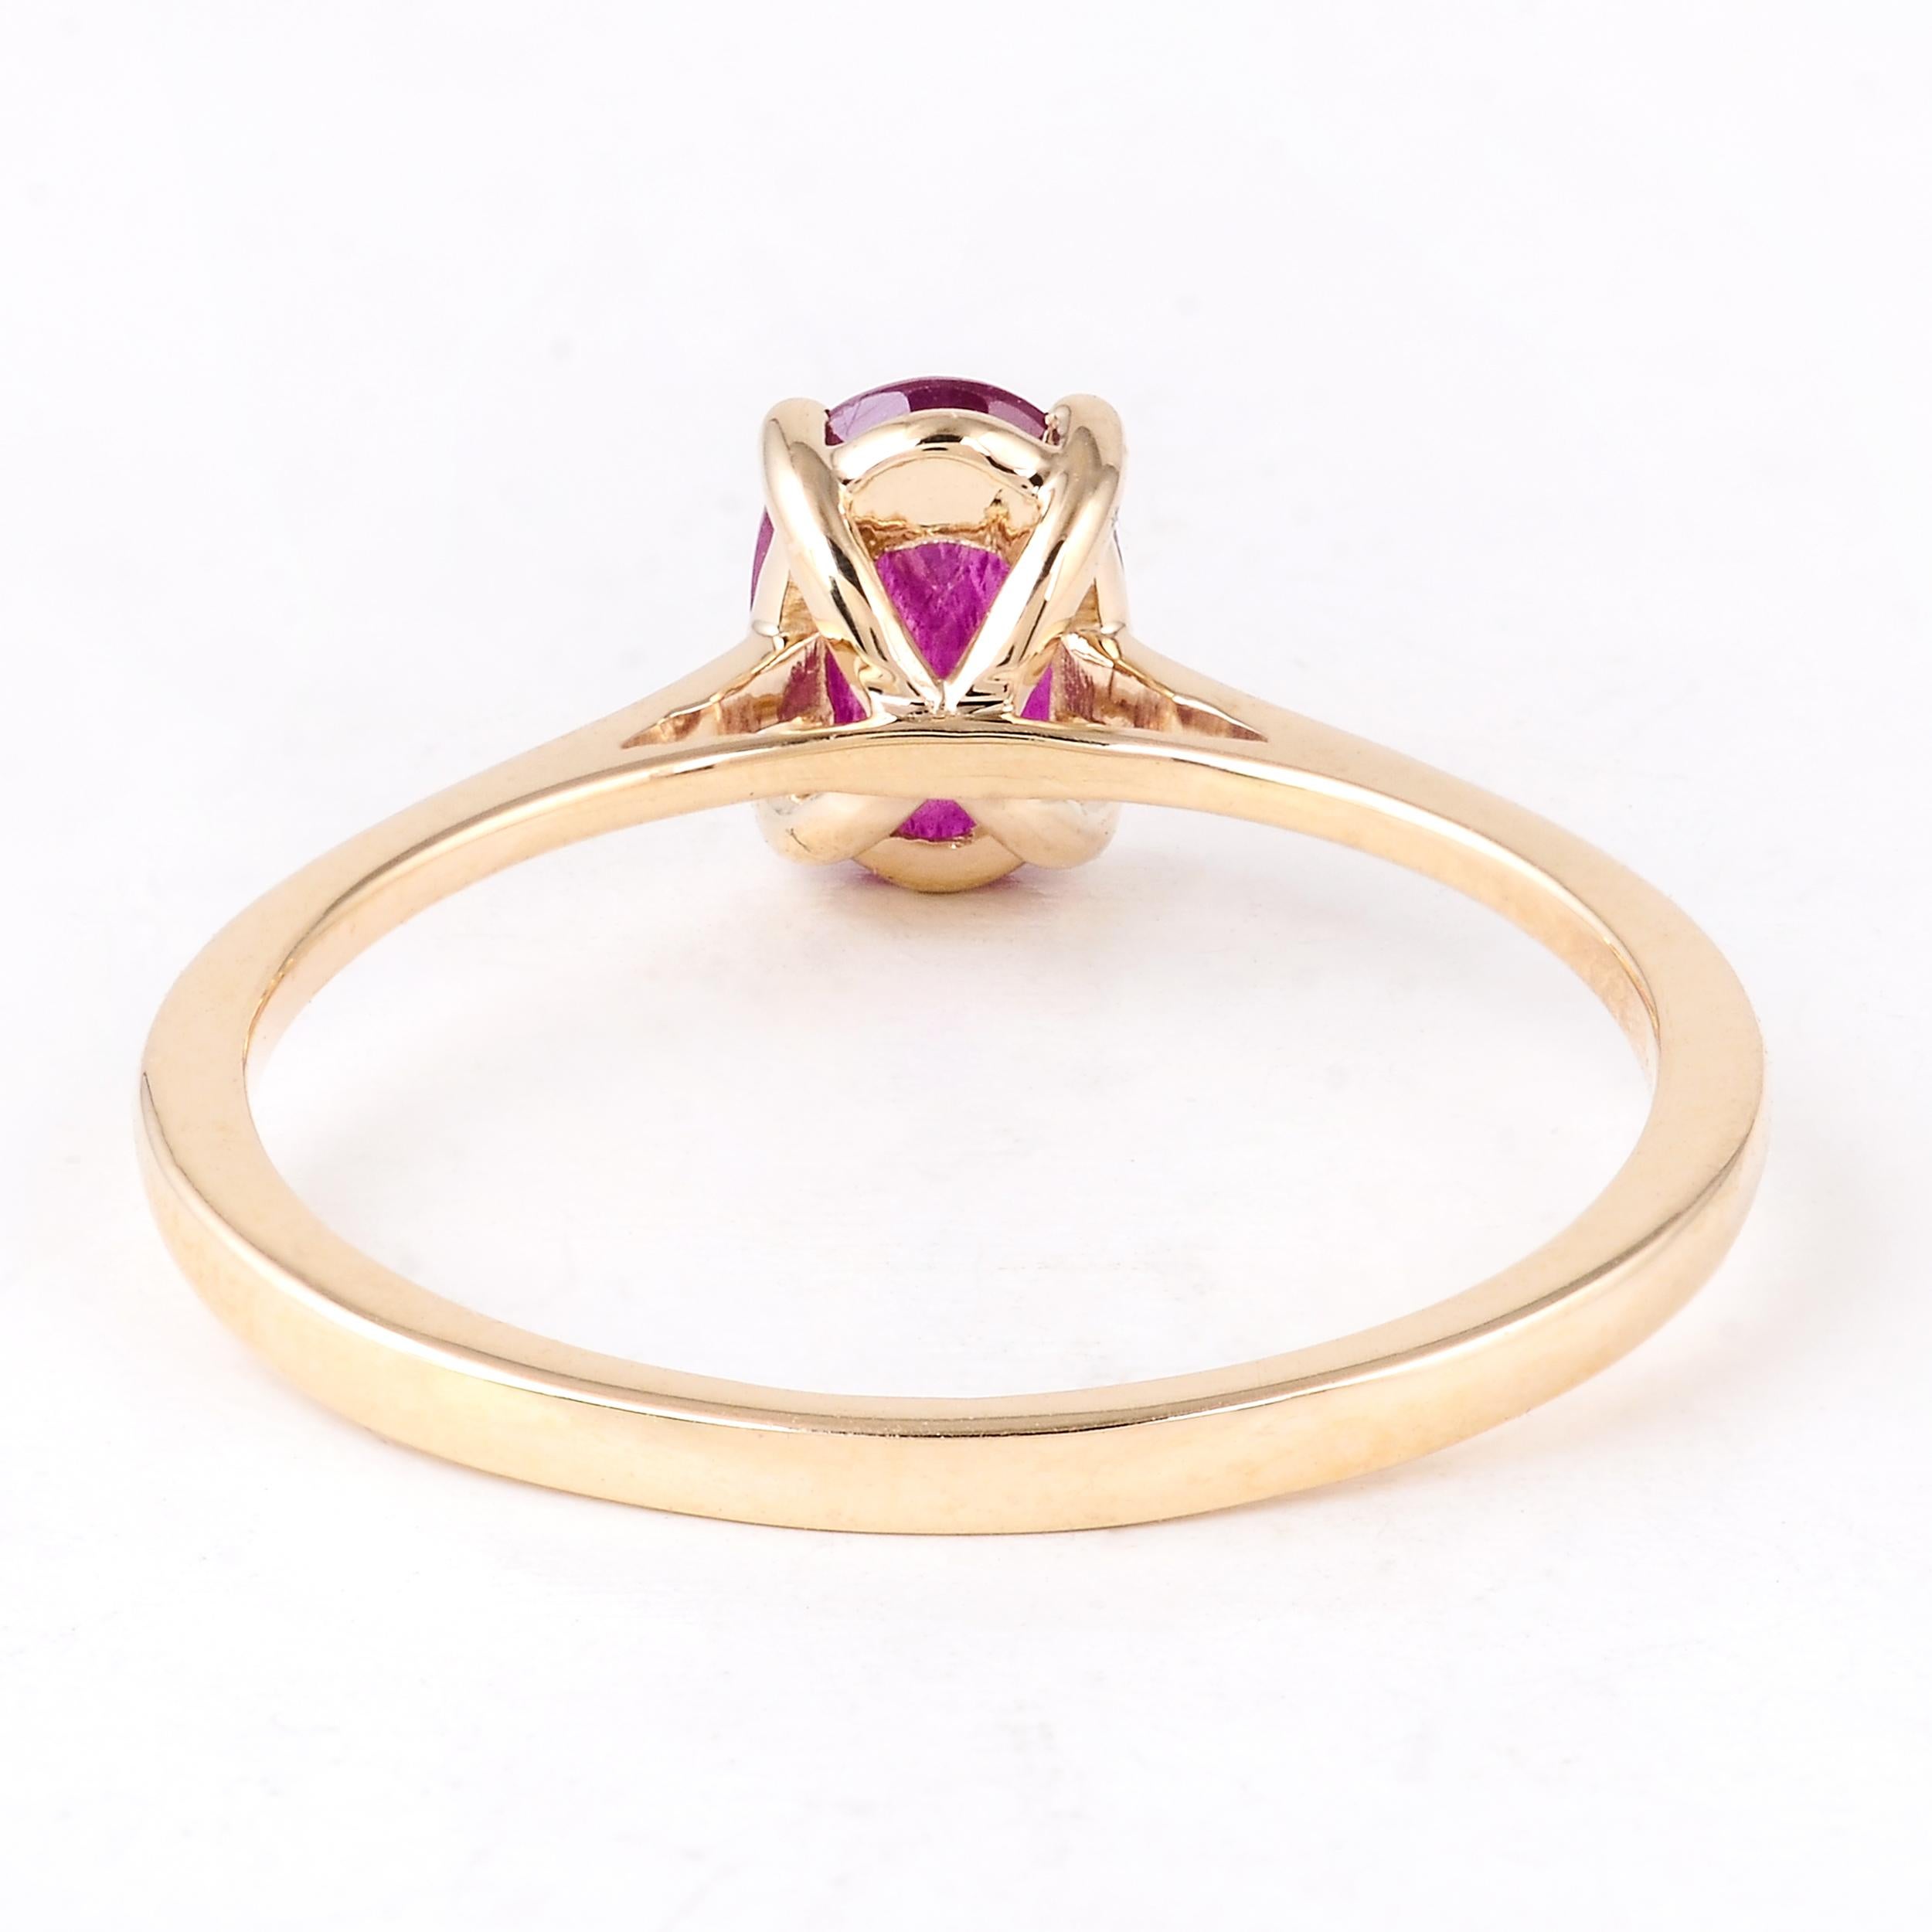 Elegant 14K Ruby Cocktail Ring, Size 6.75 - Luxury Statement Jewelry Piece For Sale 2